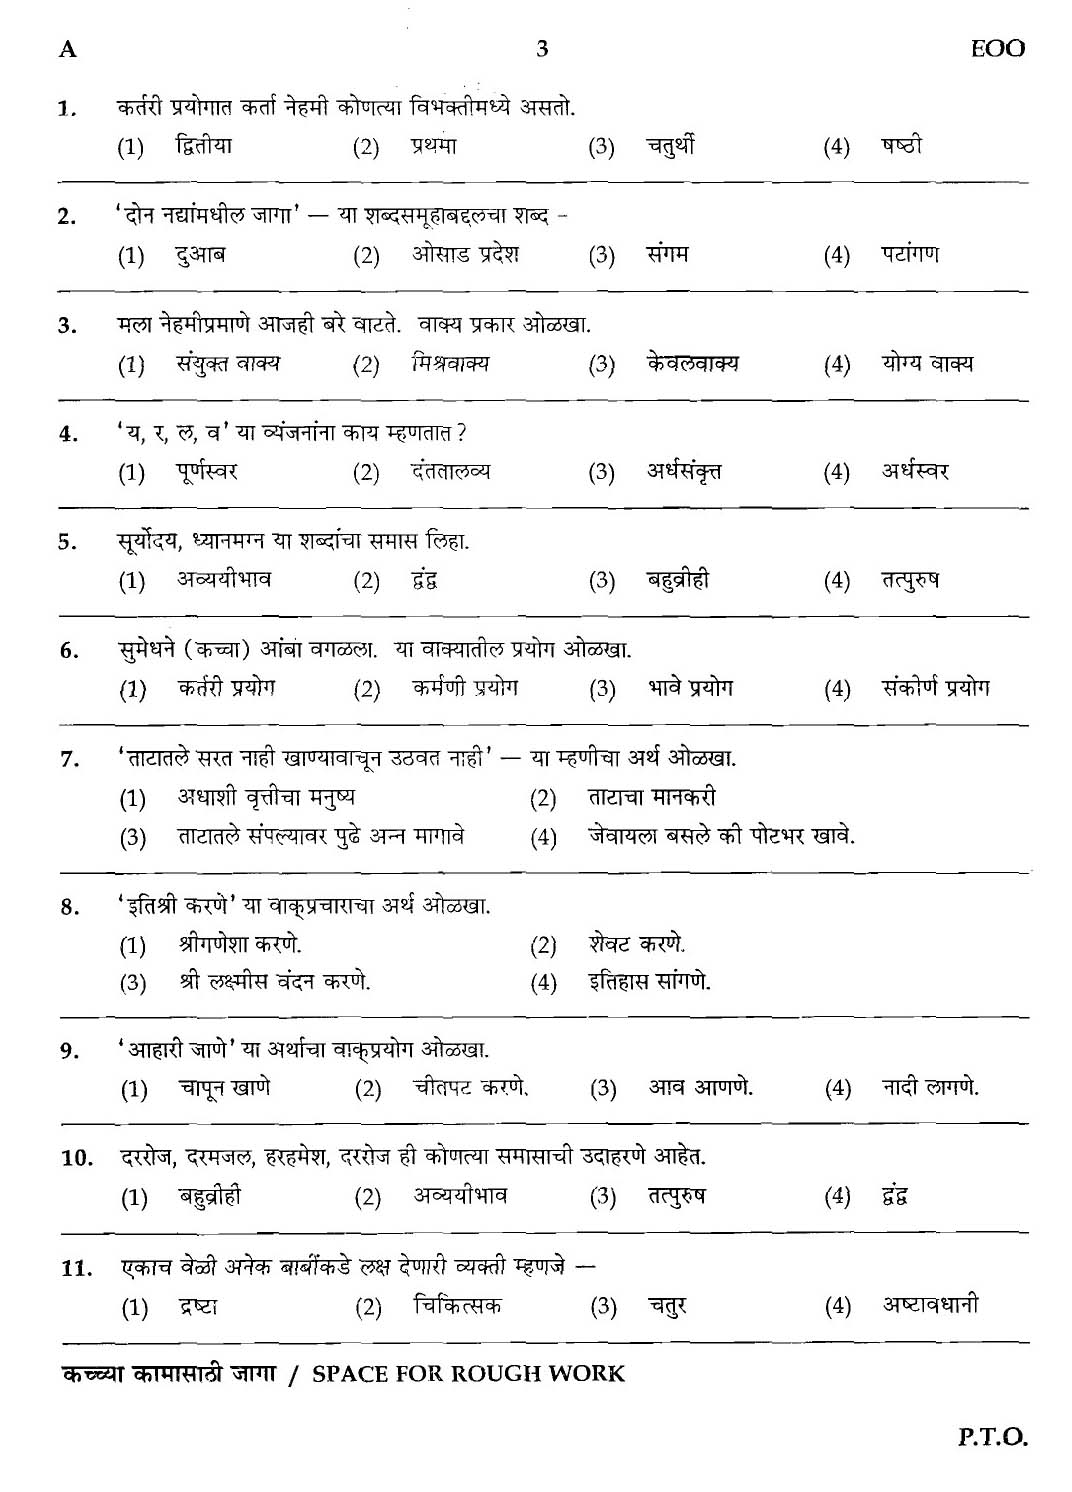 MPSC Agricultural Services Preliminary Exam 2012 Question Paper 2